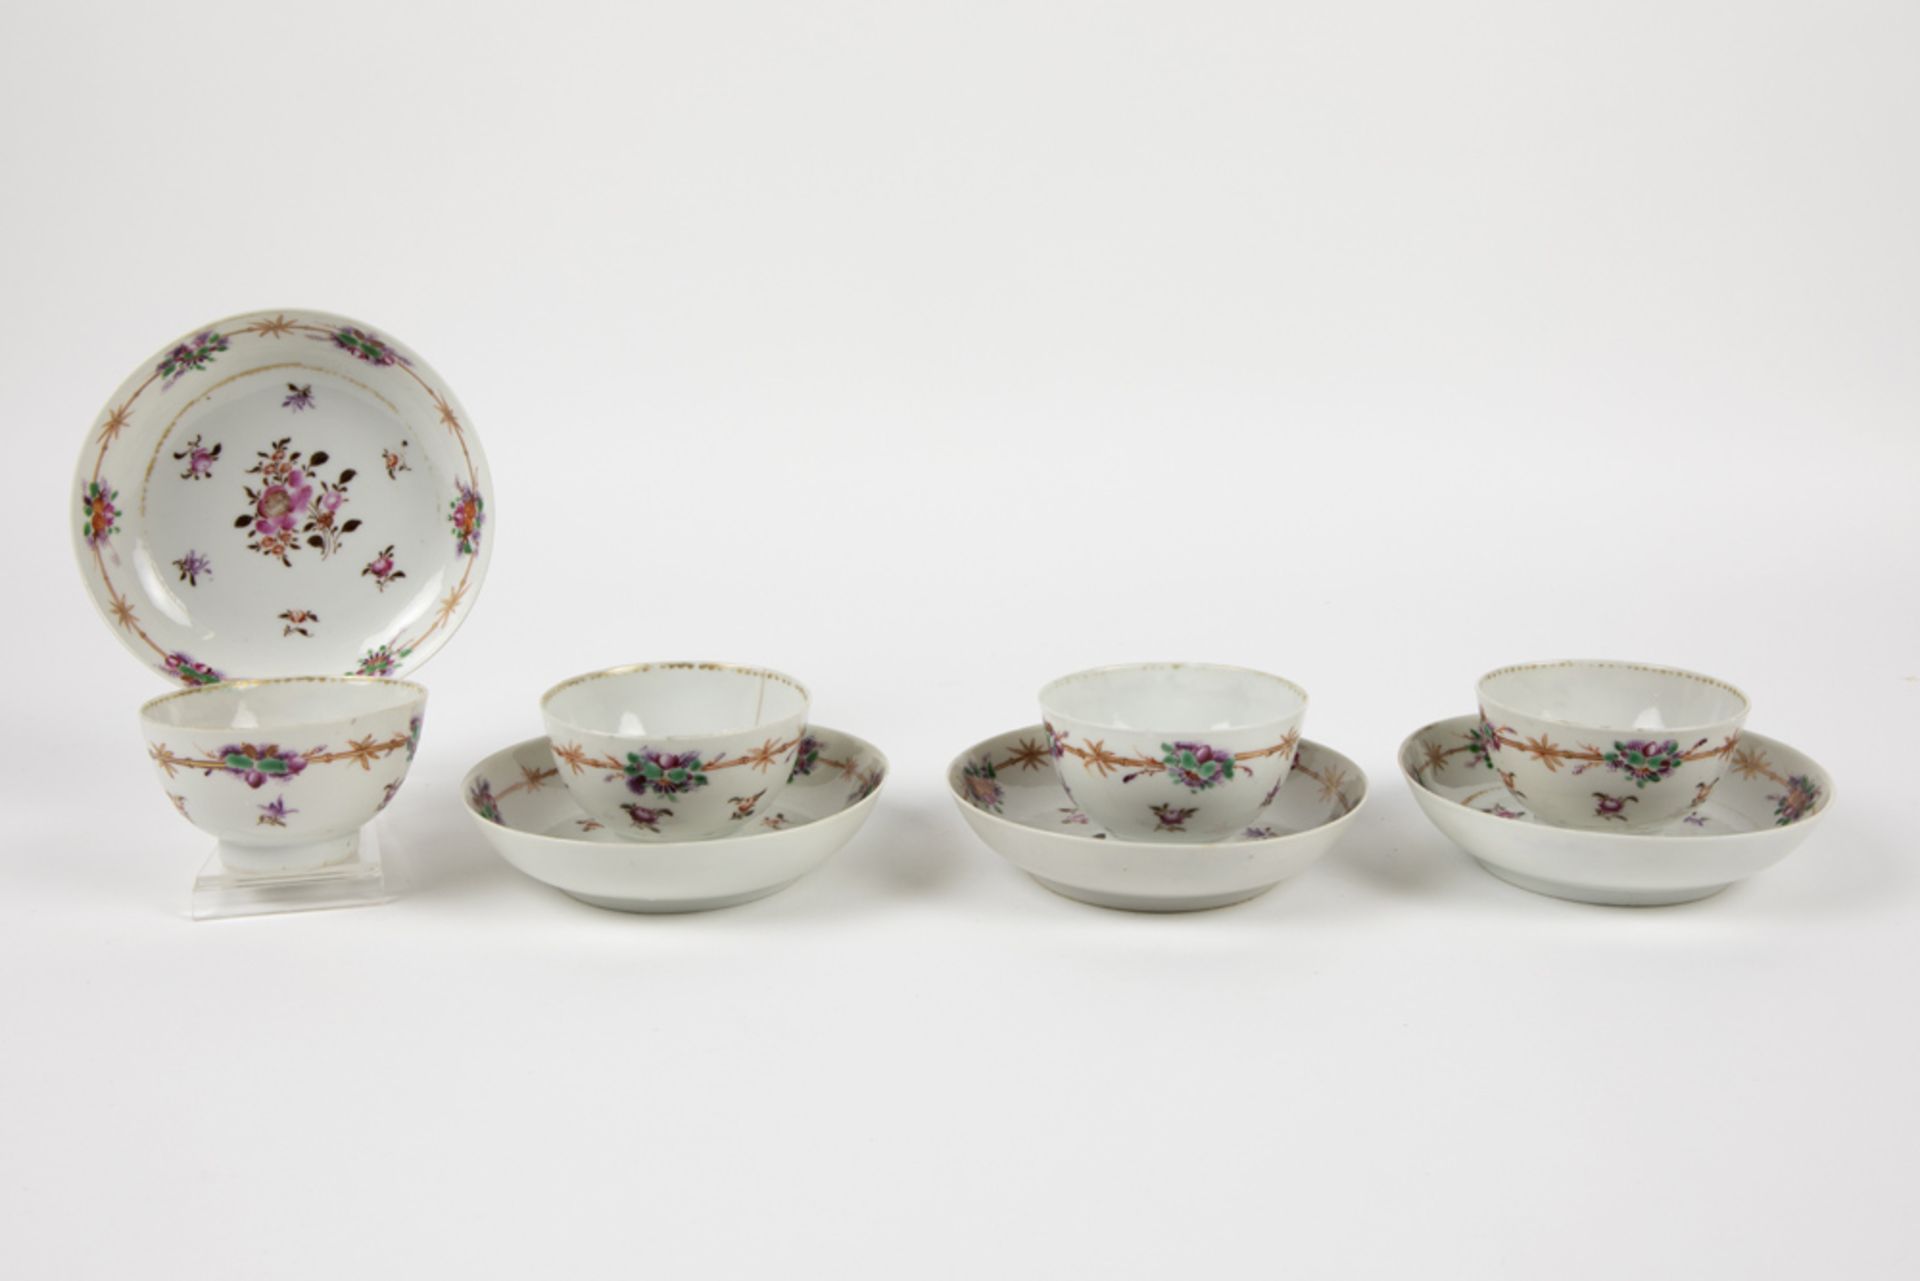 four 18th Cent. Chinese sets of cup and saucer in porcelain with a polychrome floral decor || Vier